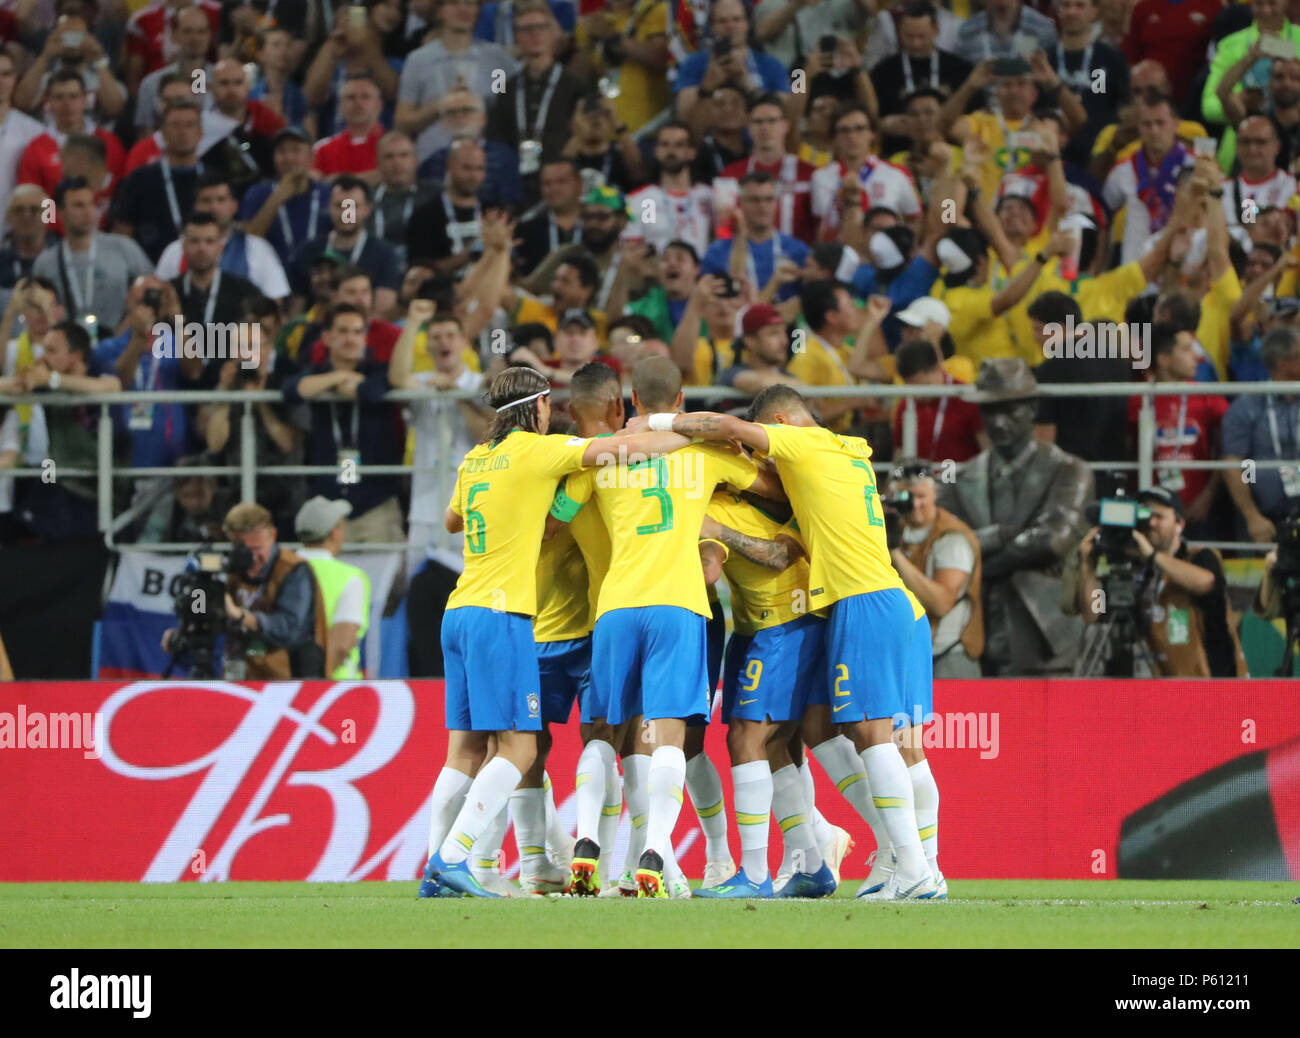 Moscow, Russia. 27th June, 2018. Players of Brazil celebrate Paulinho's goal during the 2018 FIFA World Cup Group E match between Brazil and Serbia in Moscow, Russia, June 27, 2018. Credit: Bai Xueqi/Xinhua/Alamy Live News Stock Photo